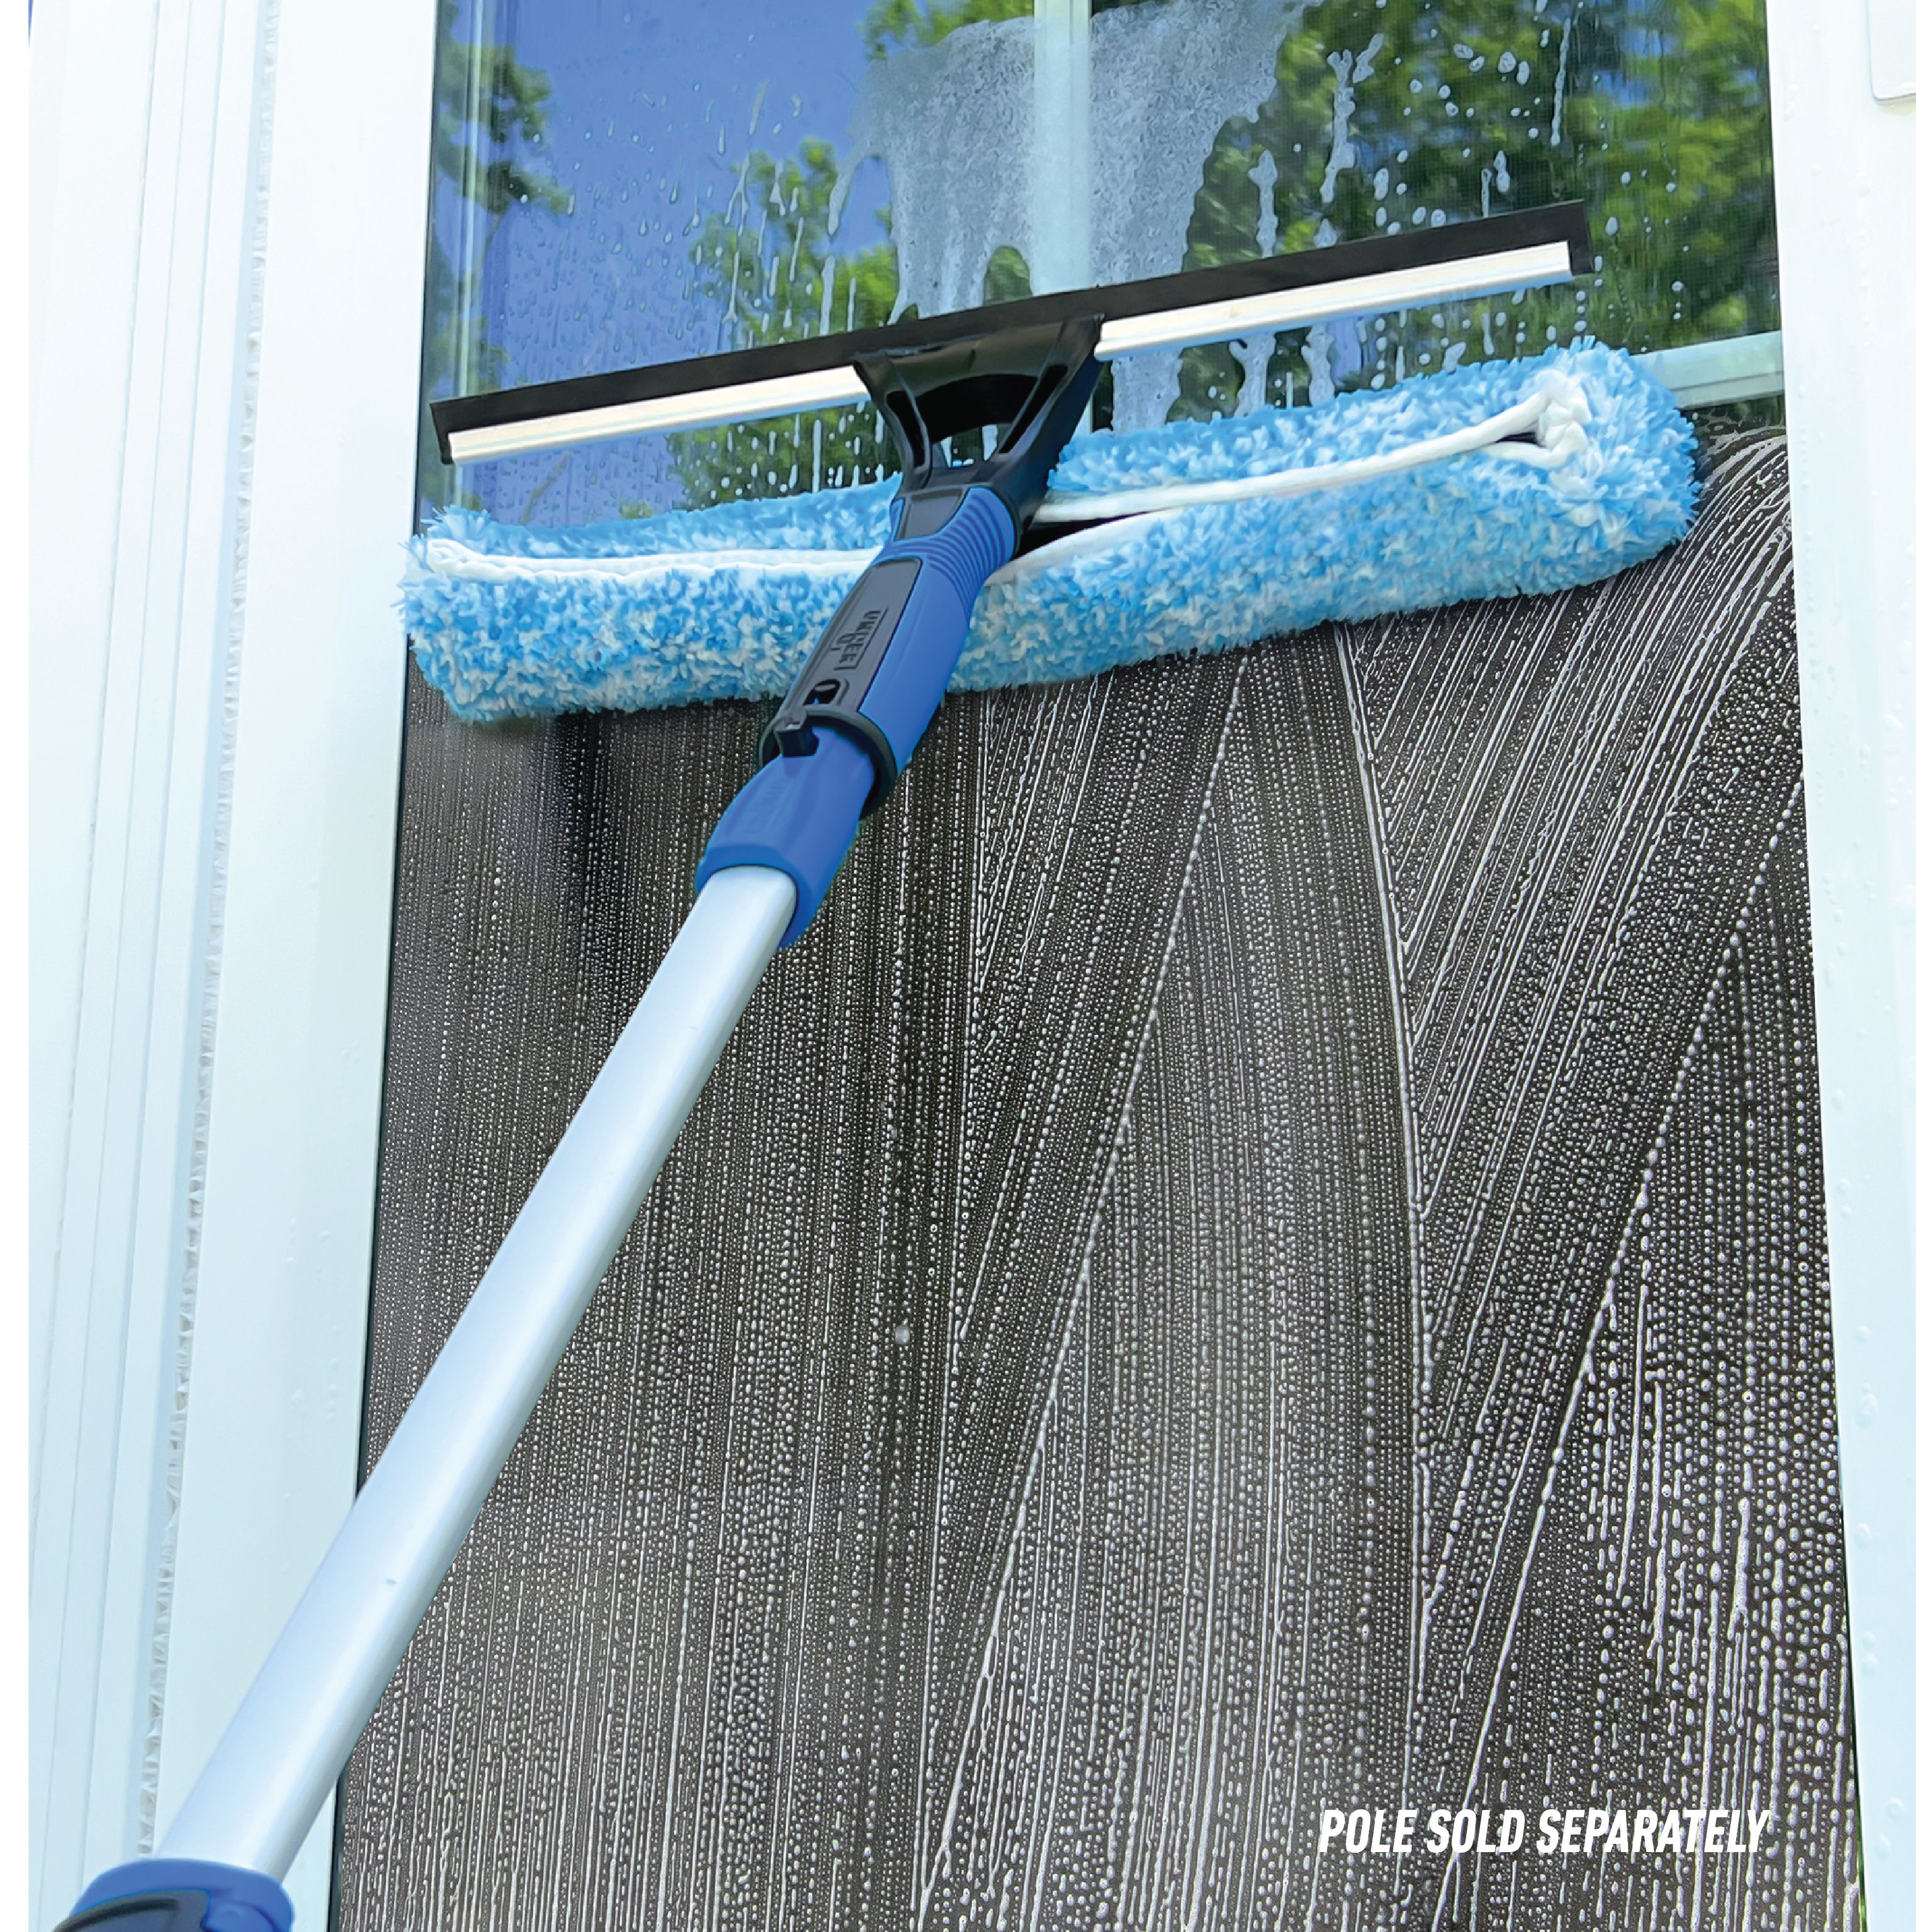 981640_UI_Unger Pro_14 inch 2-in-1 Window Cleaner_In-Use 1